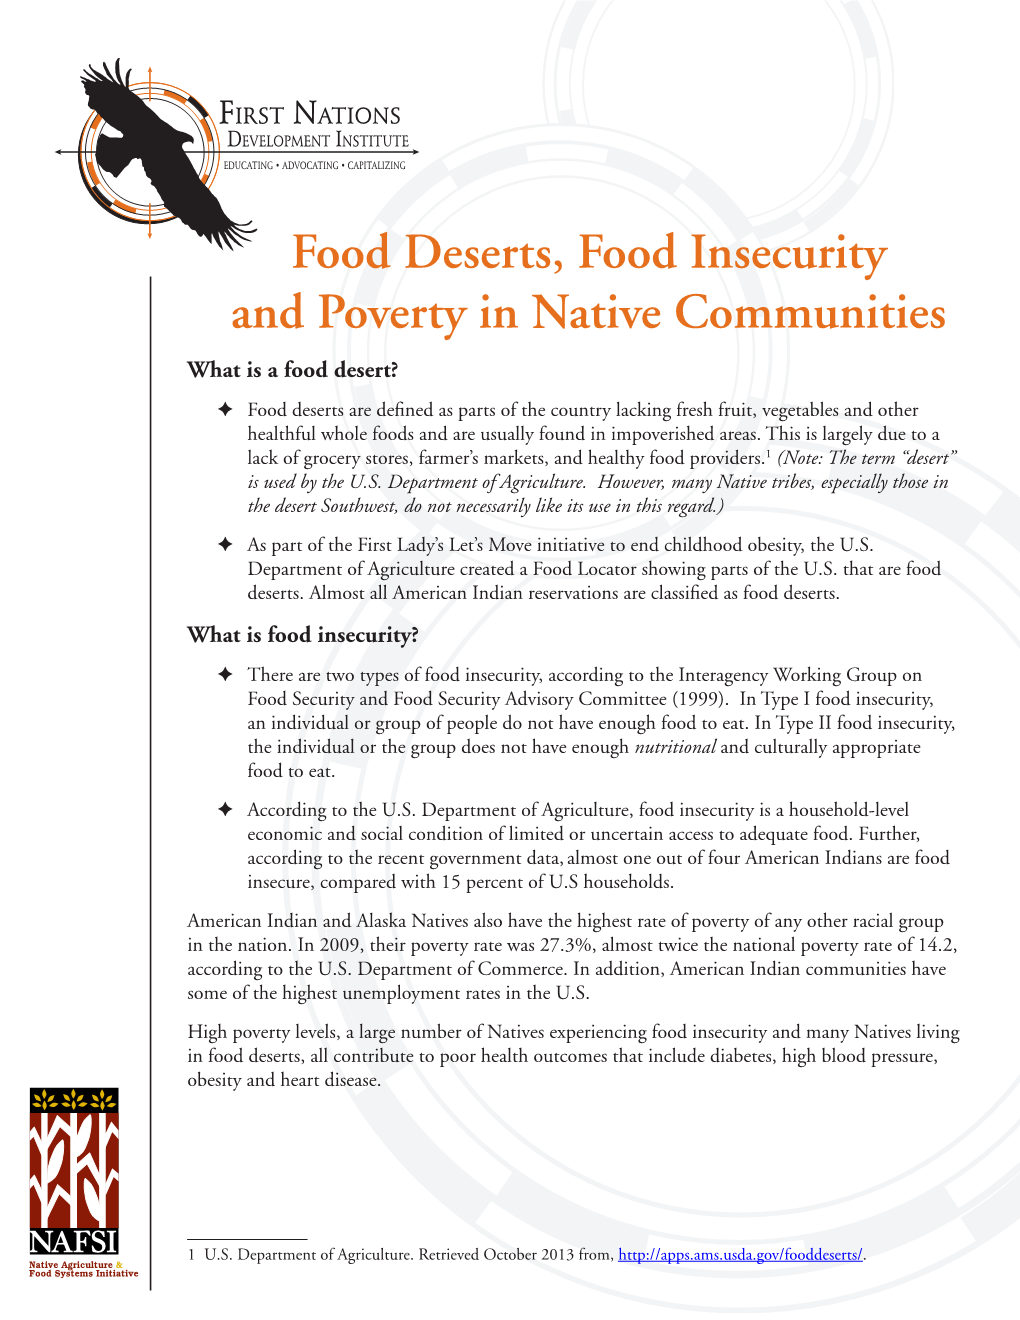 Food Deserts, Food Insecurity and Poverty in Native Communities